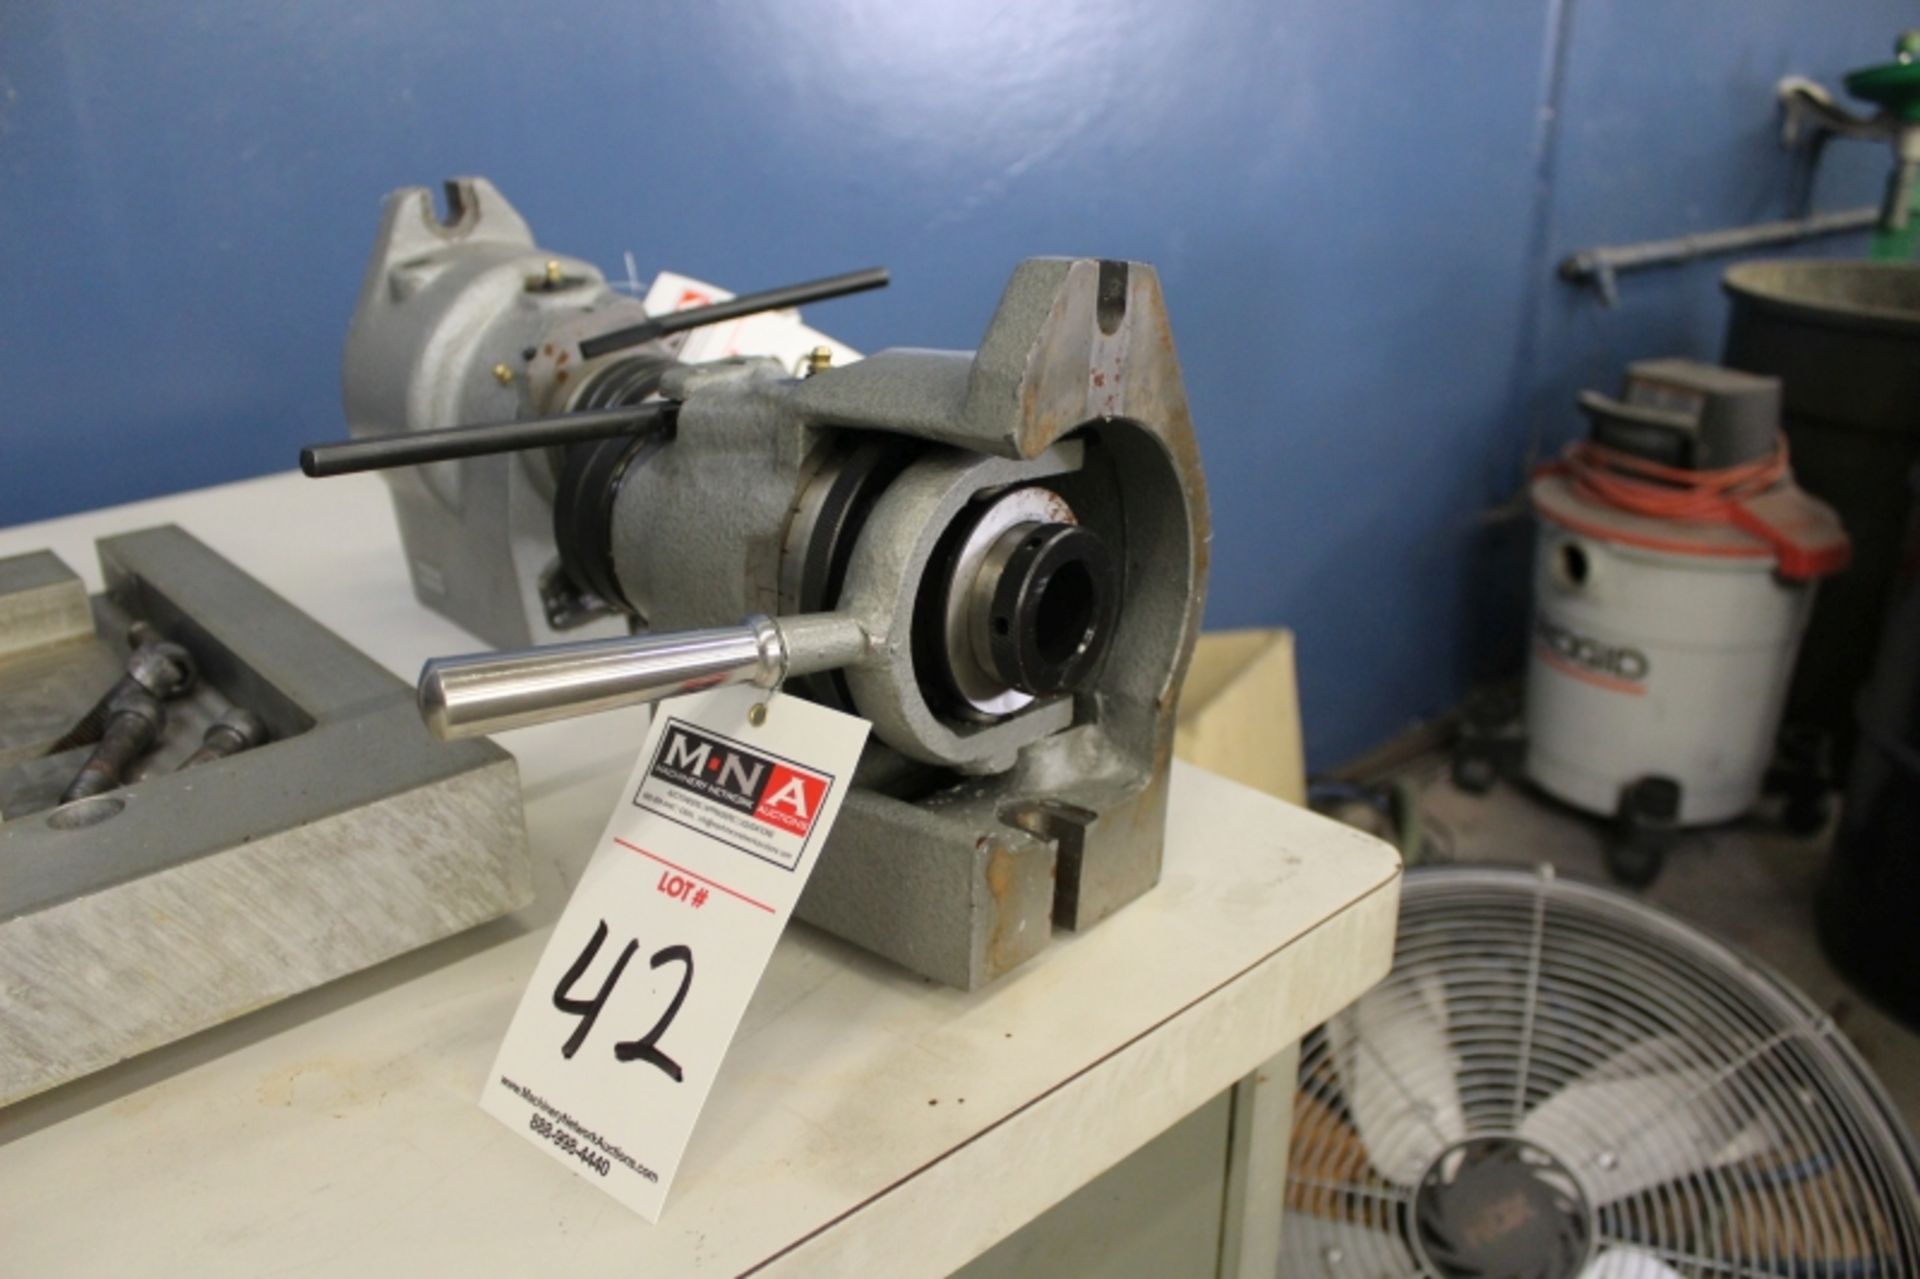 Phase Ii 5C Ver./Hori. Collet Indexer S/N 1410015 - Image 2 of 3